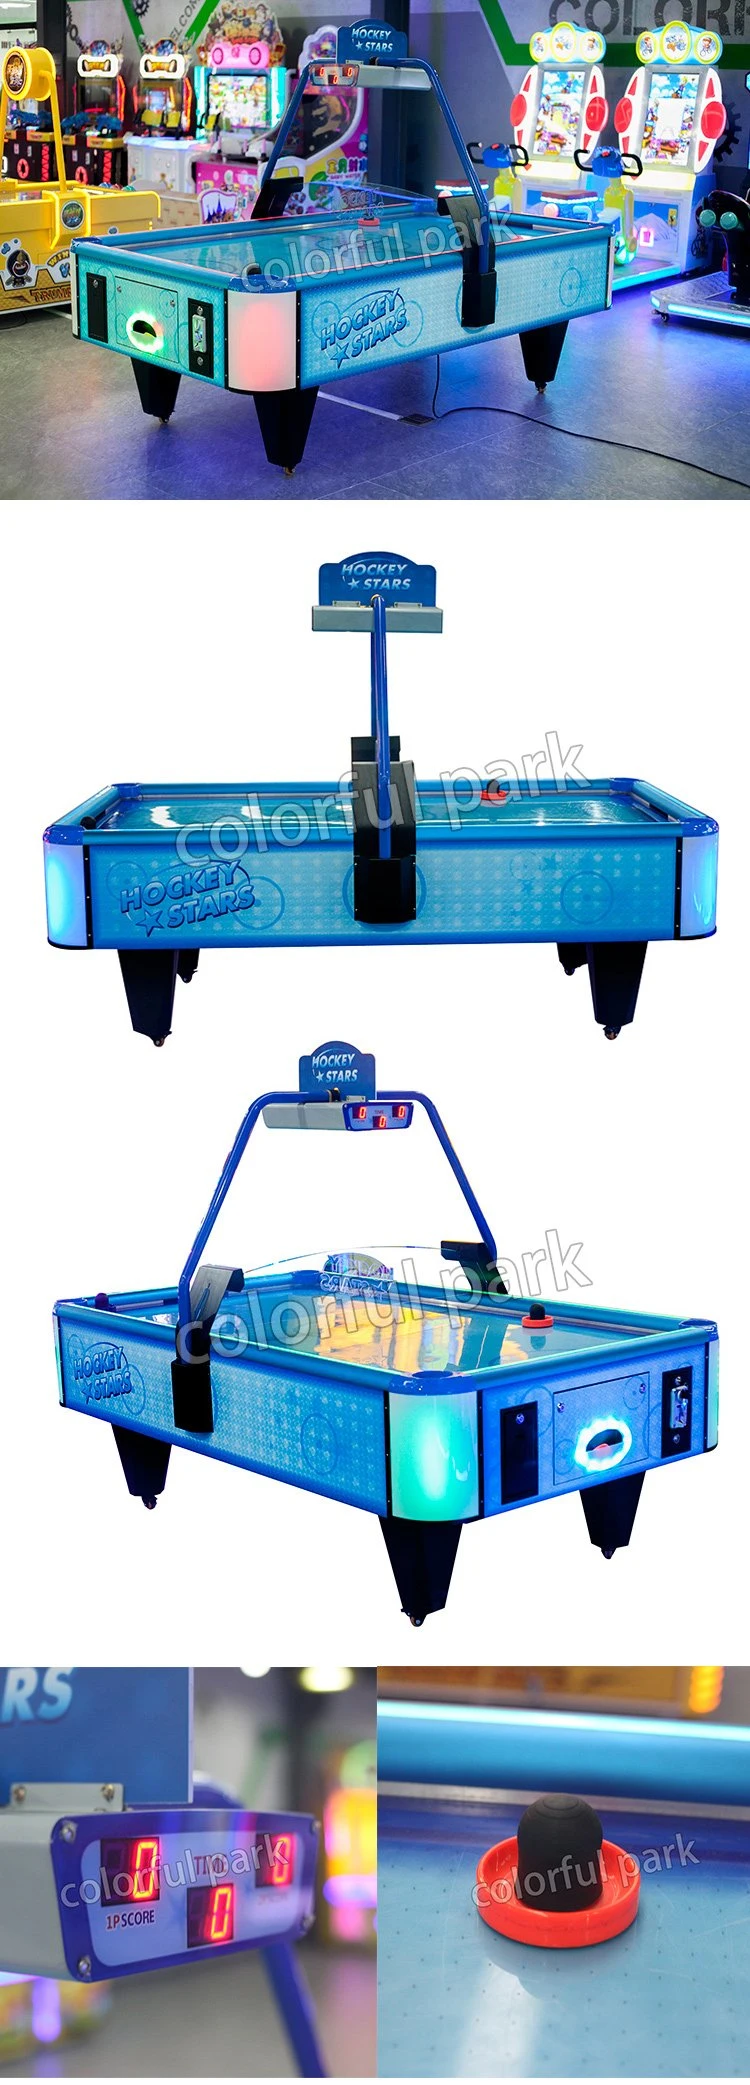 Colorful Park Coin Operated Air Hockey Table Sport Game Arcade Game Machines